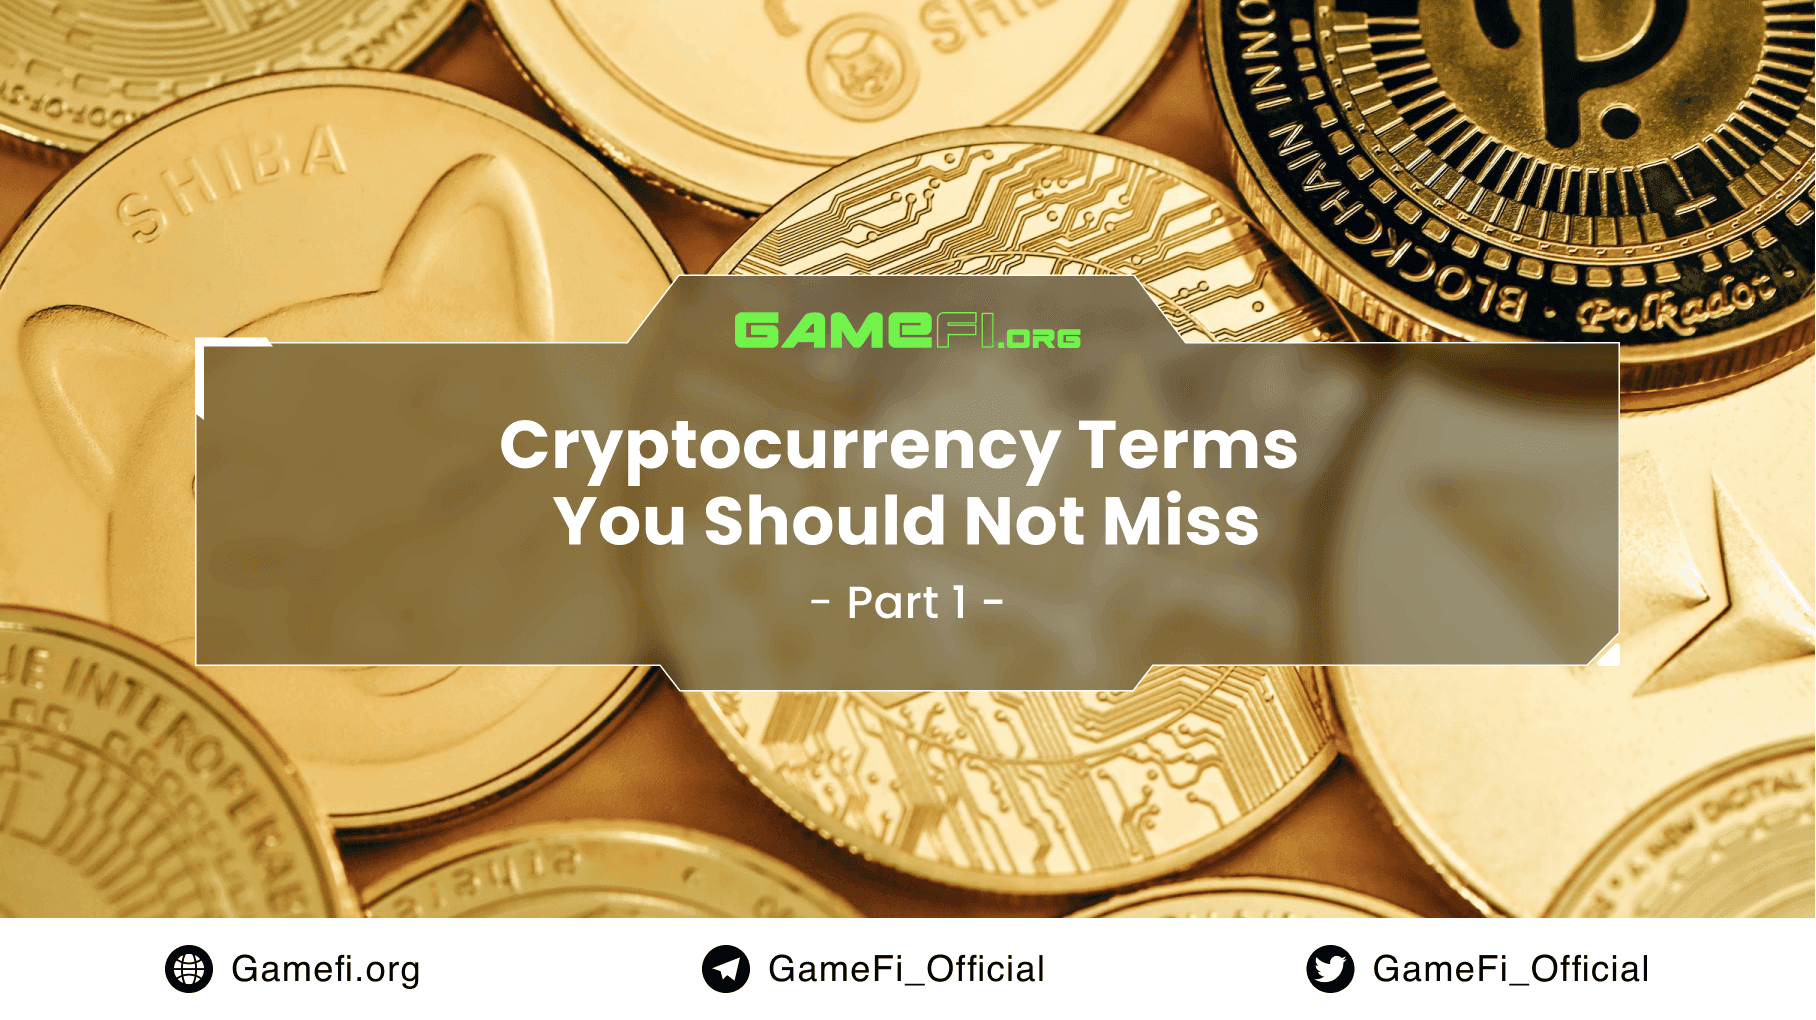 Cryptocurrency Terms You Should Not Miss! (Part 1)